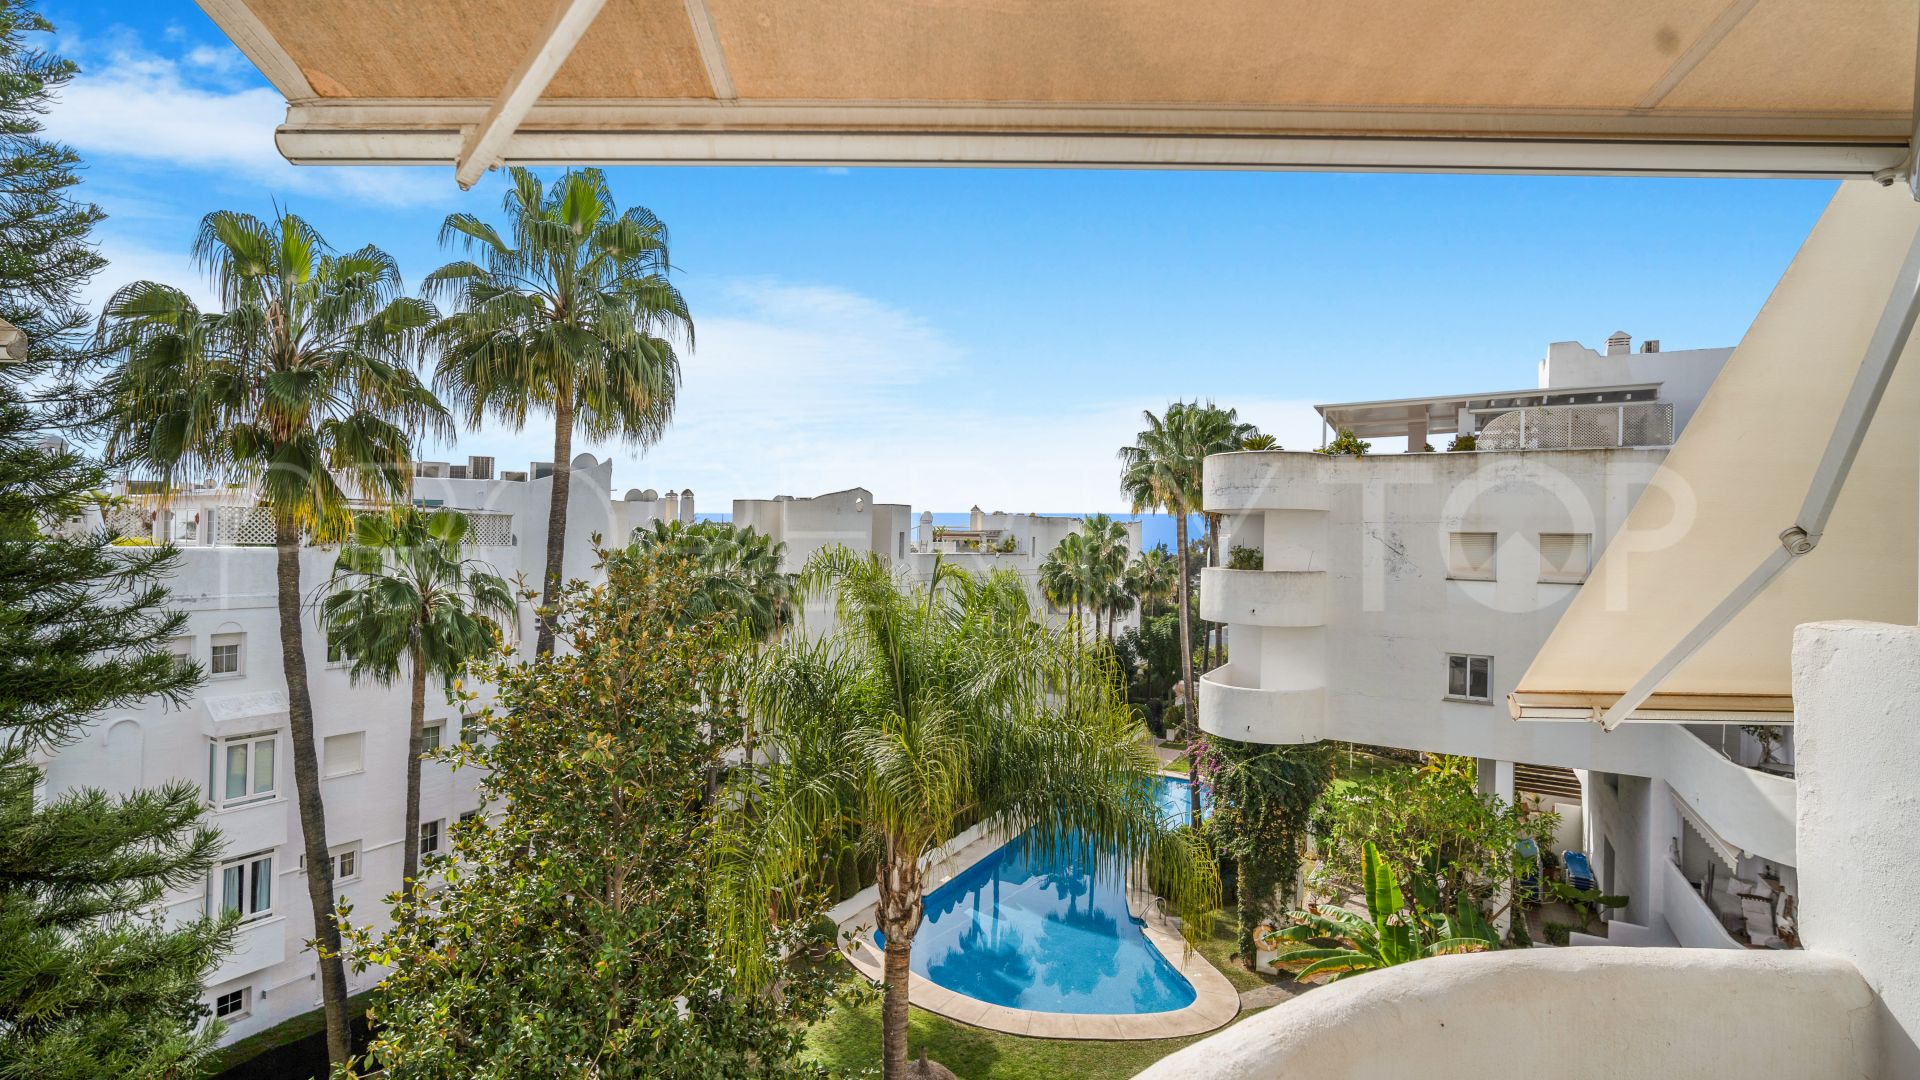 3 bedrooms Marbella Real duplex penthouse for sale